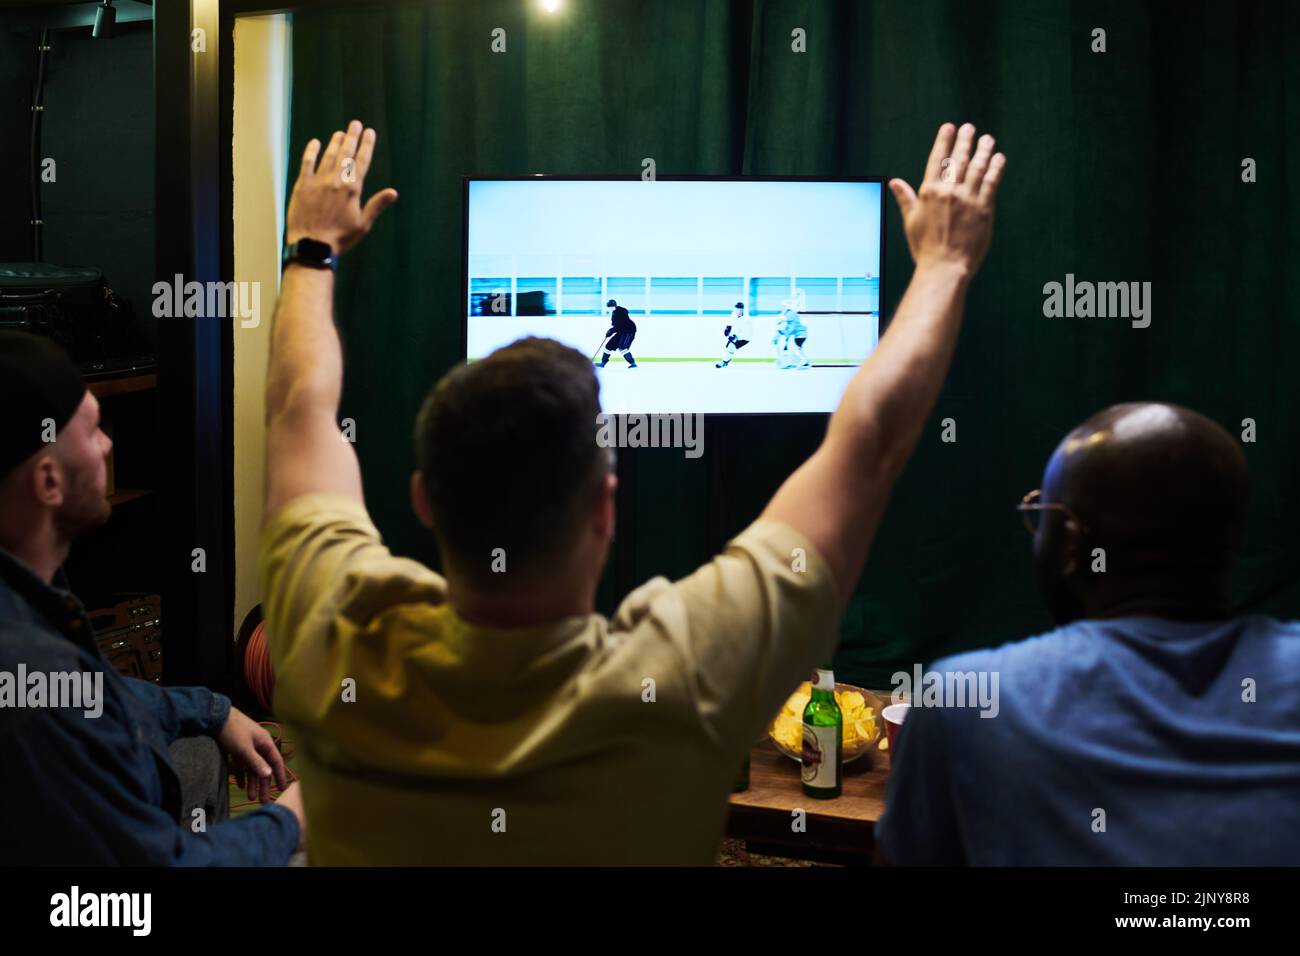 Rear view of three young intercultural men watching hockey broadcast on tv and having beer with snack while one of them keeping arms raised Stock Photo